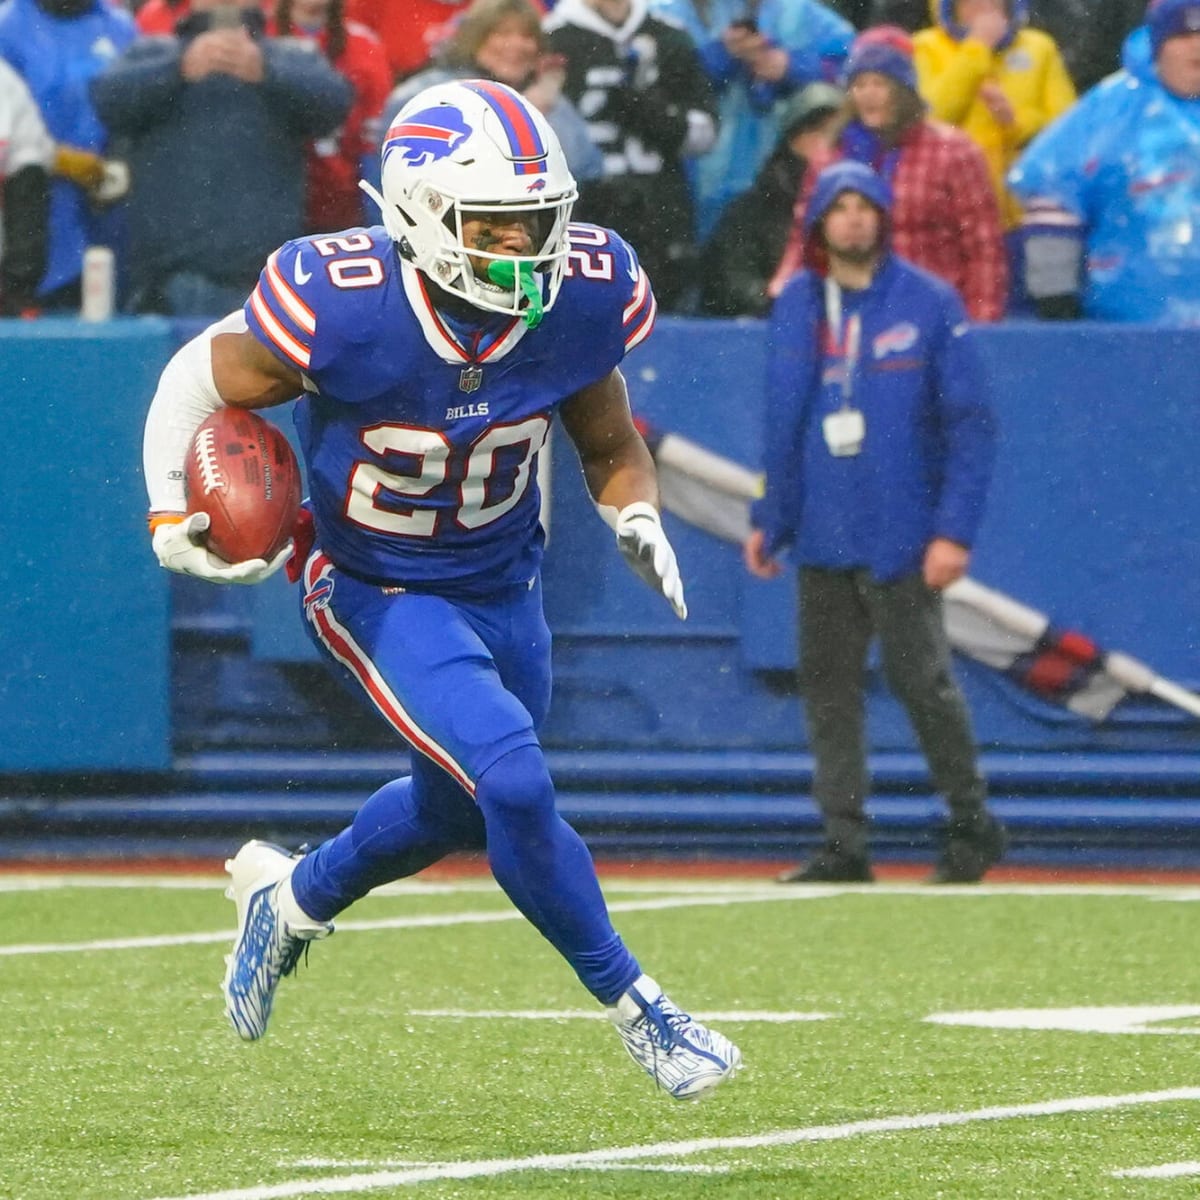 Buffalo Bills return two kickoffs for touchdowns and secure win in first  game since Damar Hamlin's collapse - CBS News